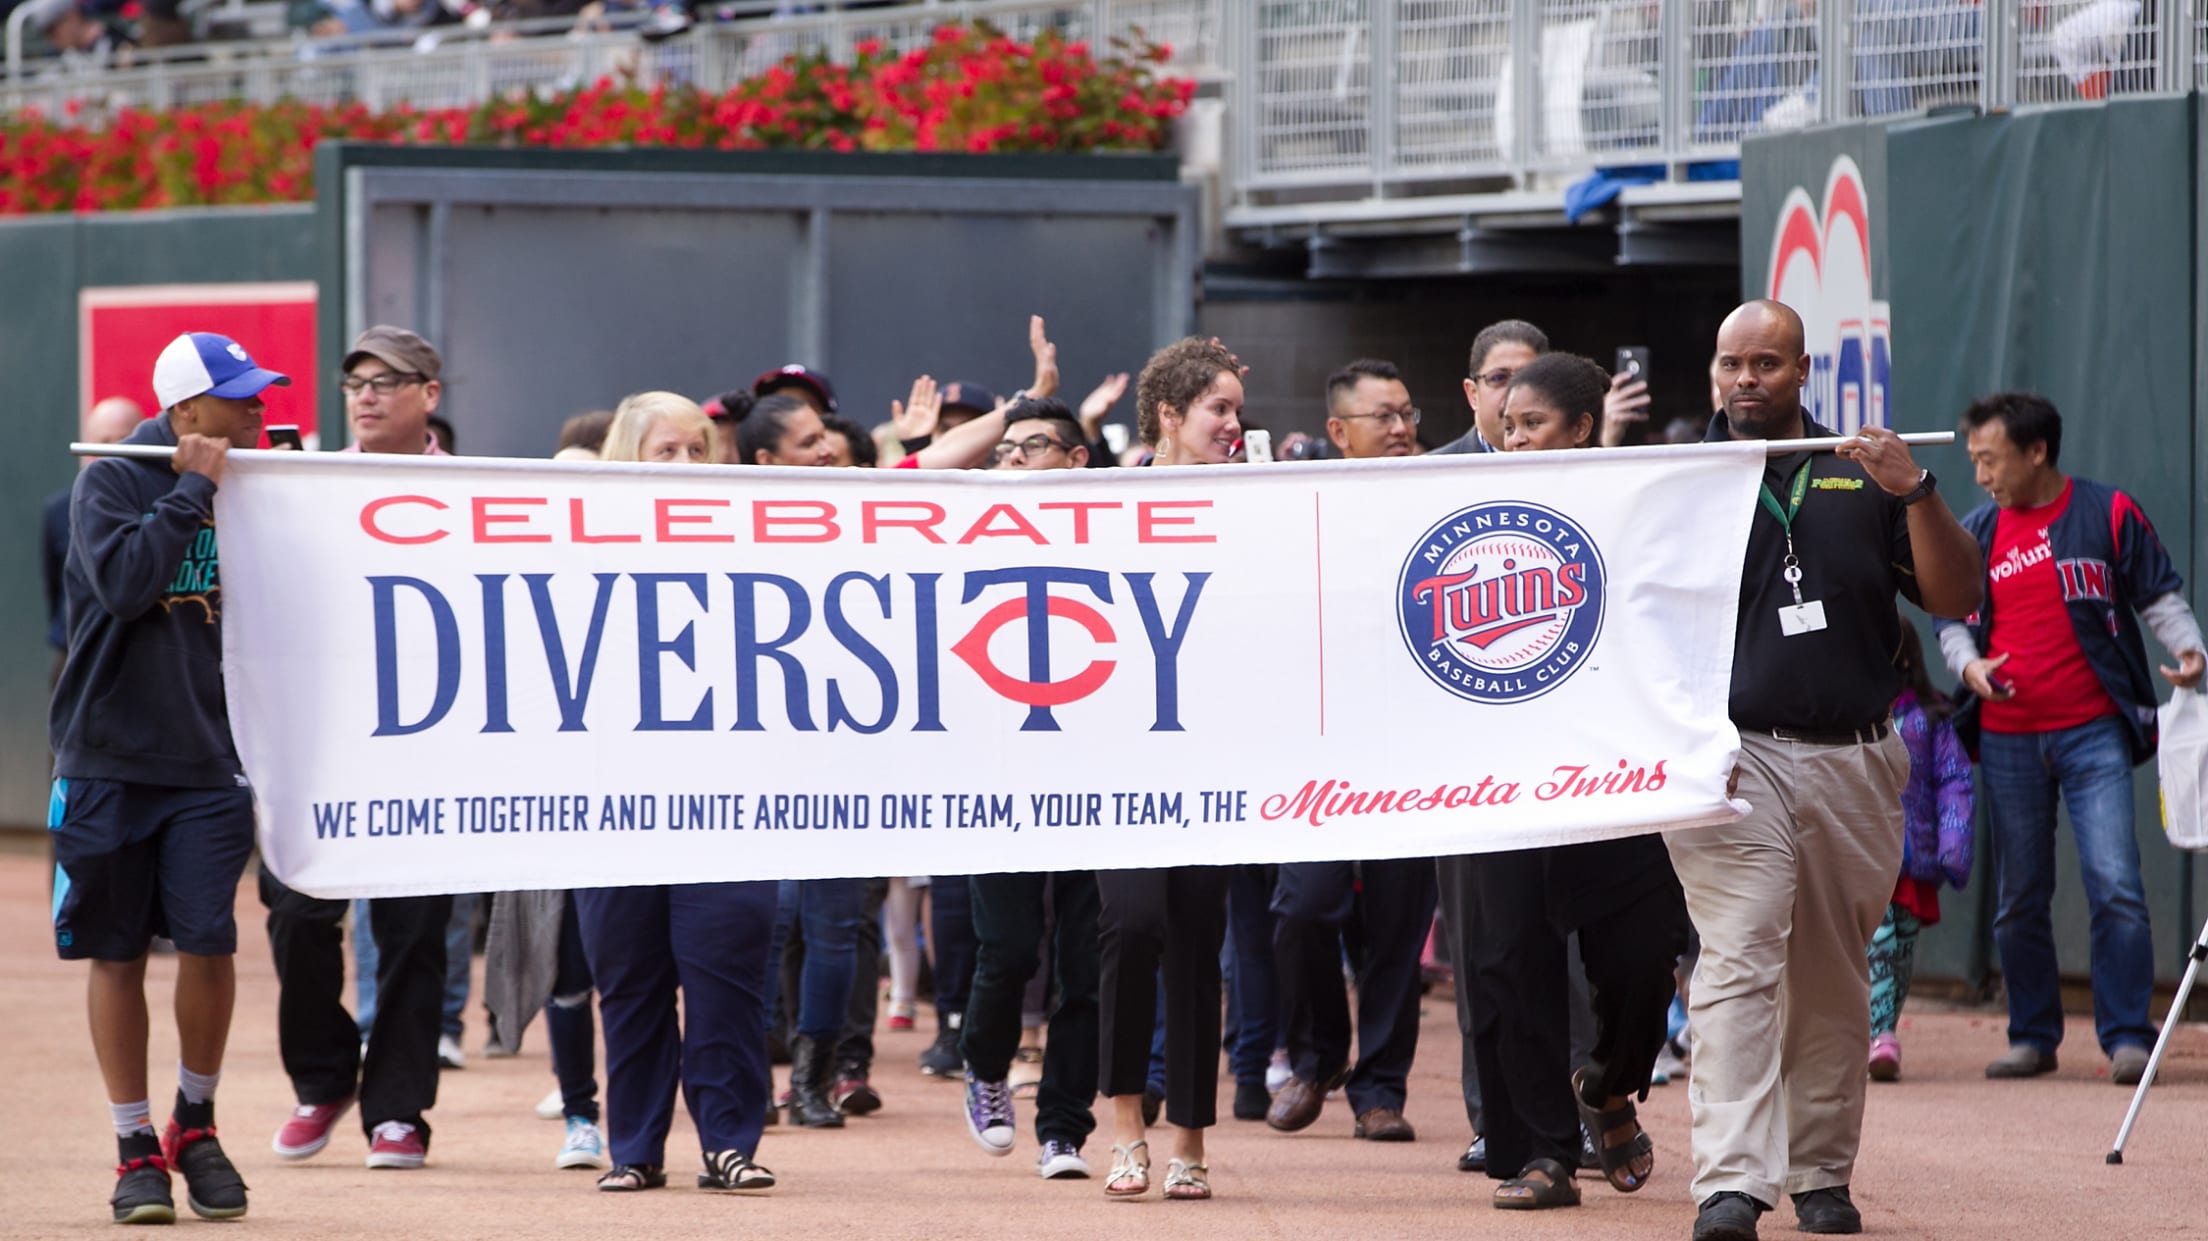 MLB diversity and inclusion events